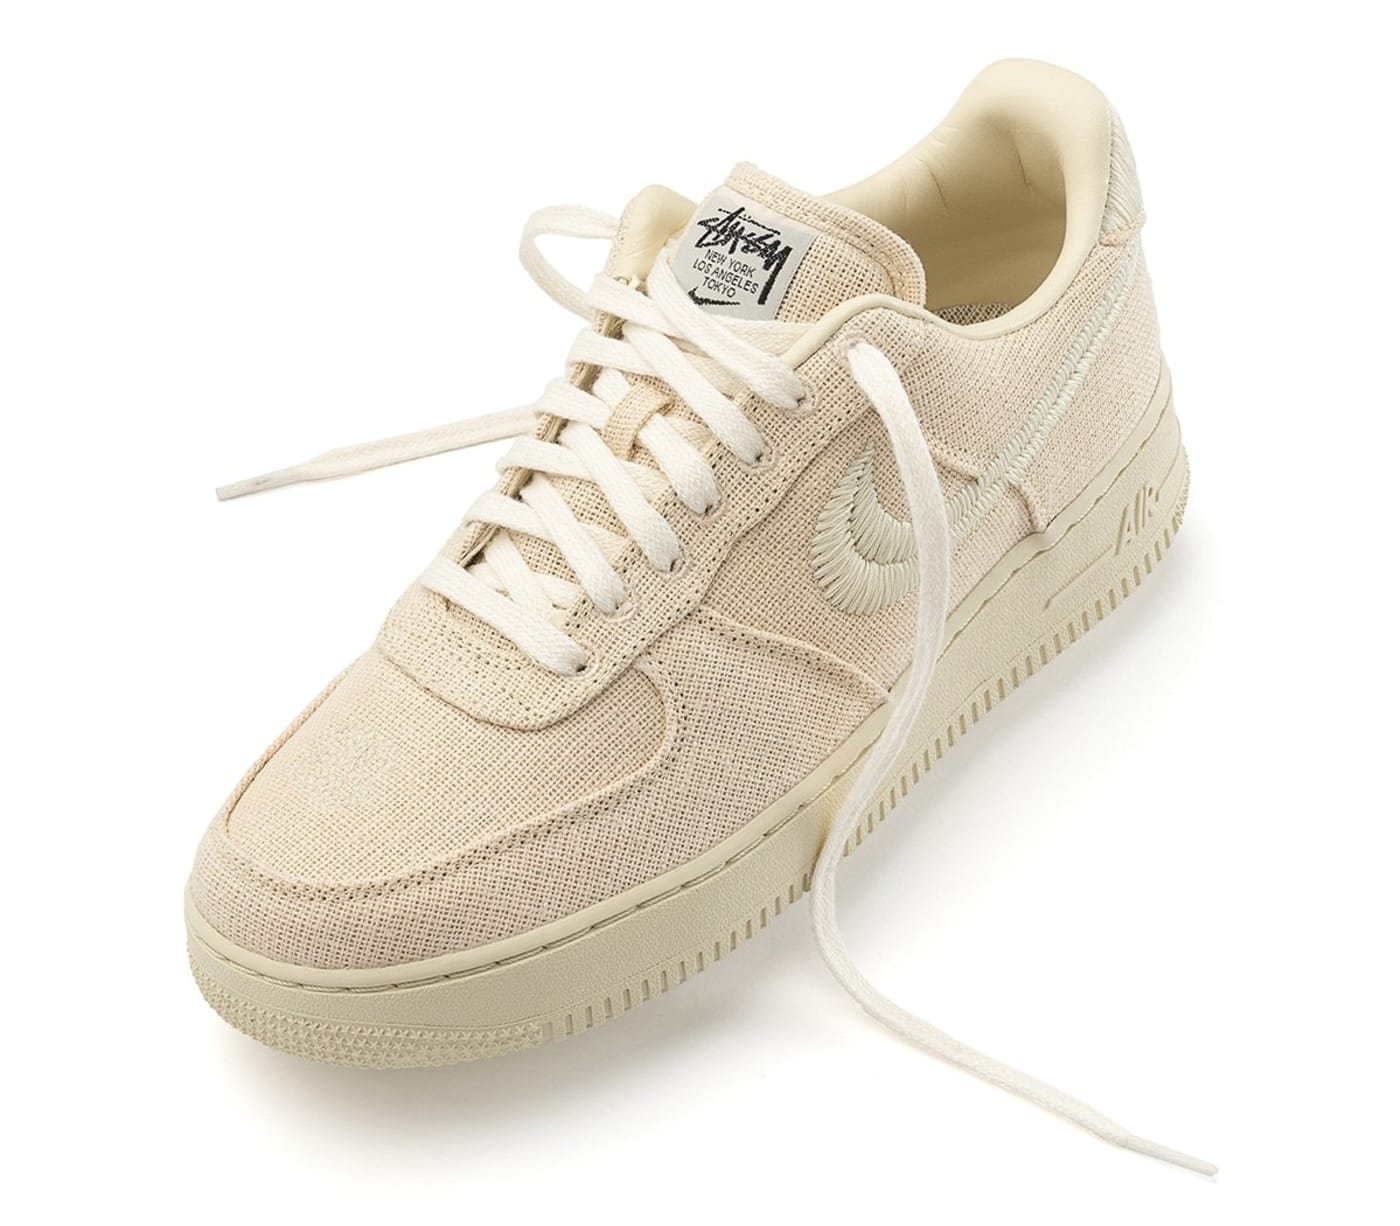 stores near me that sell nike air force 1